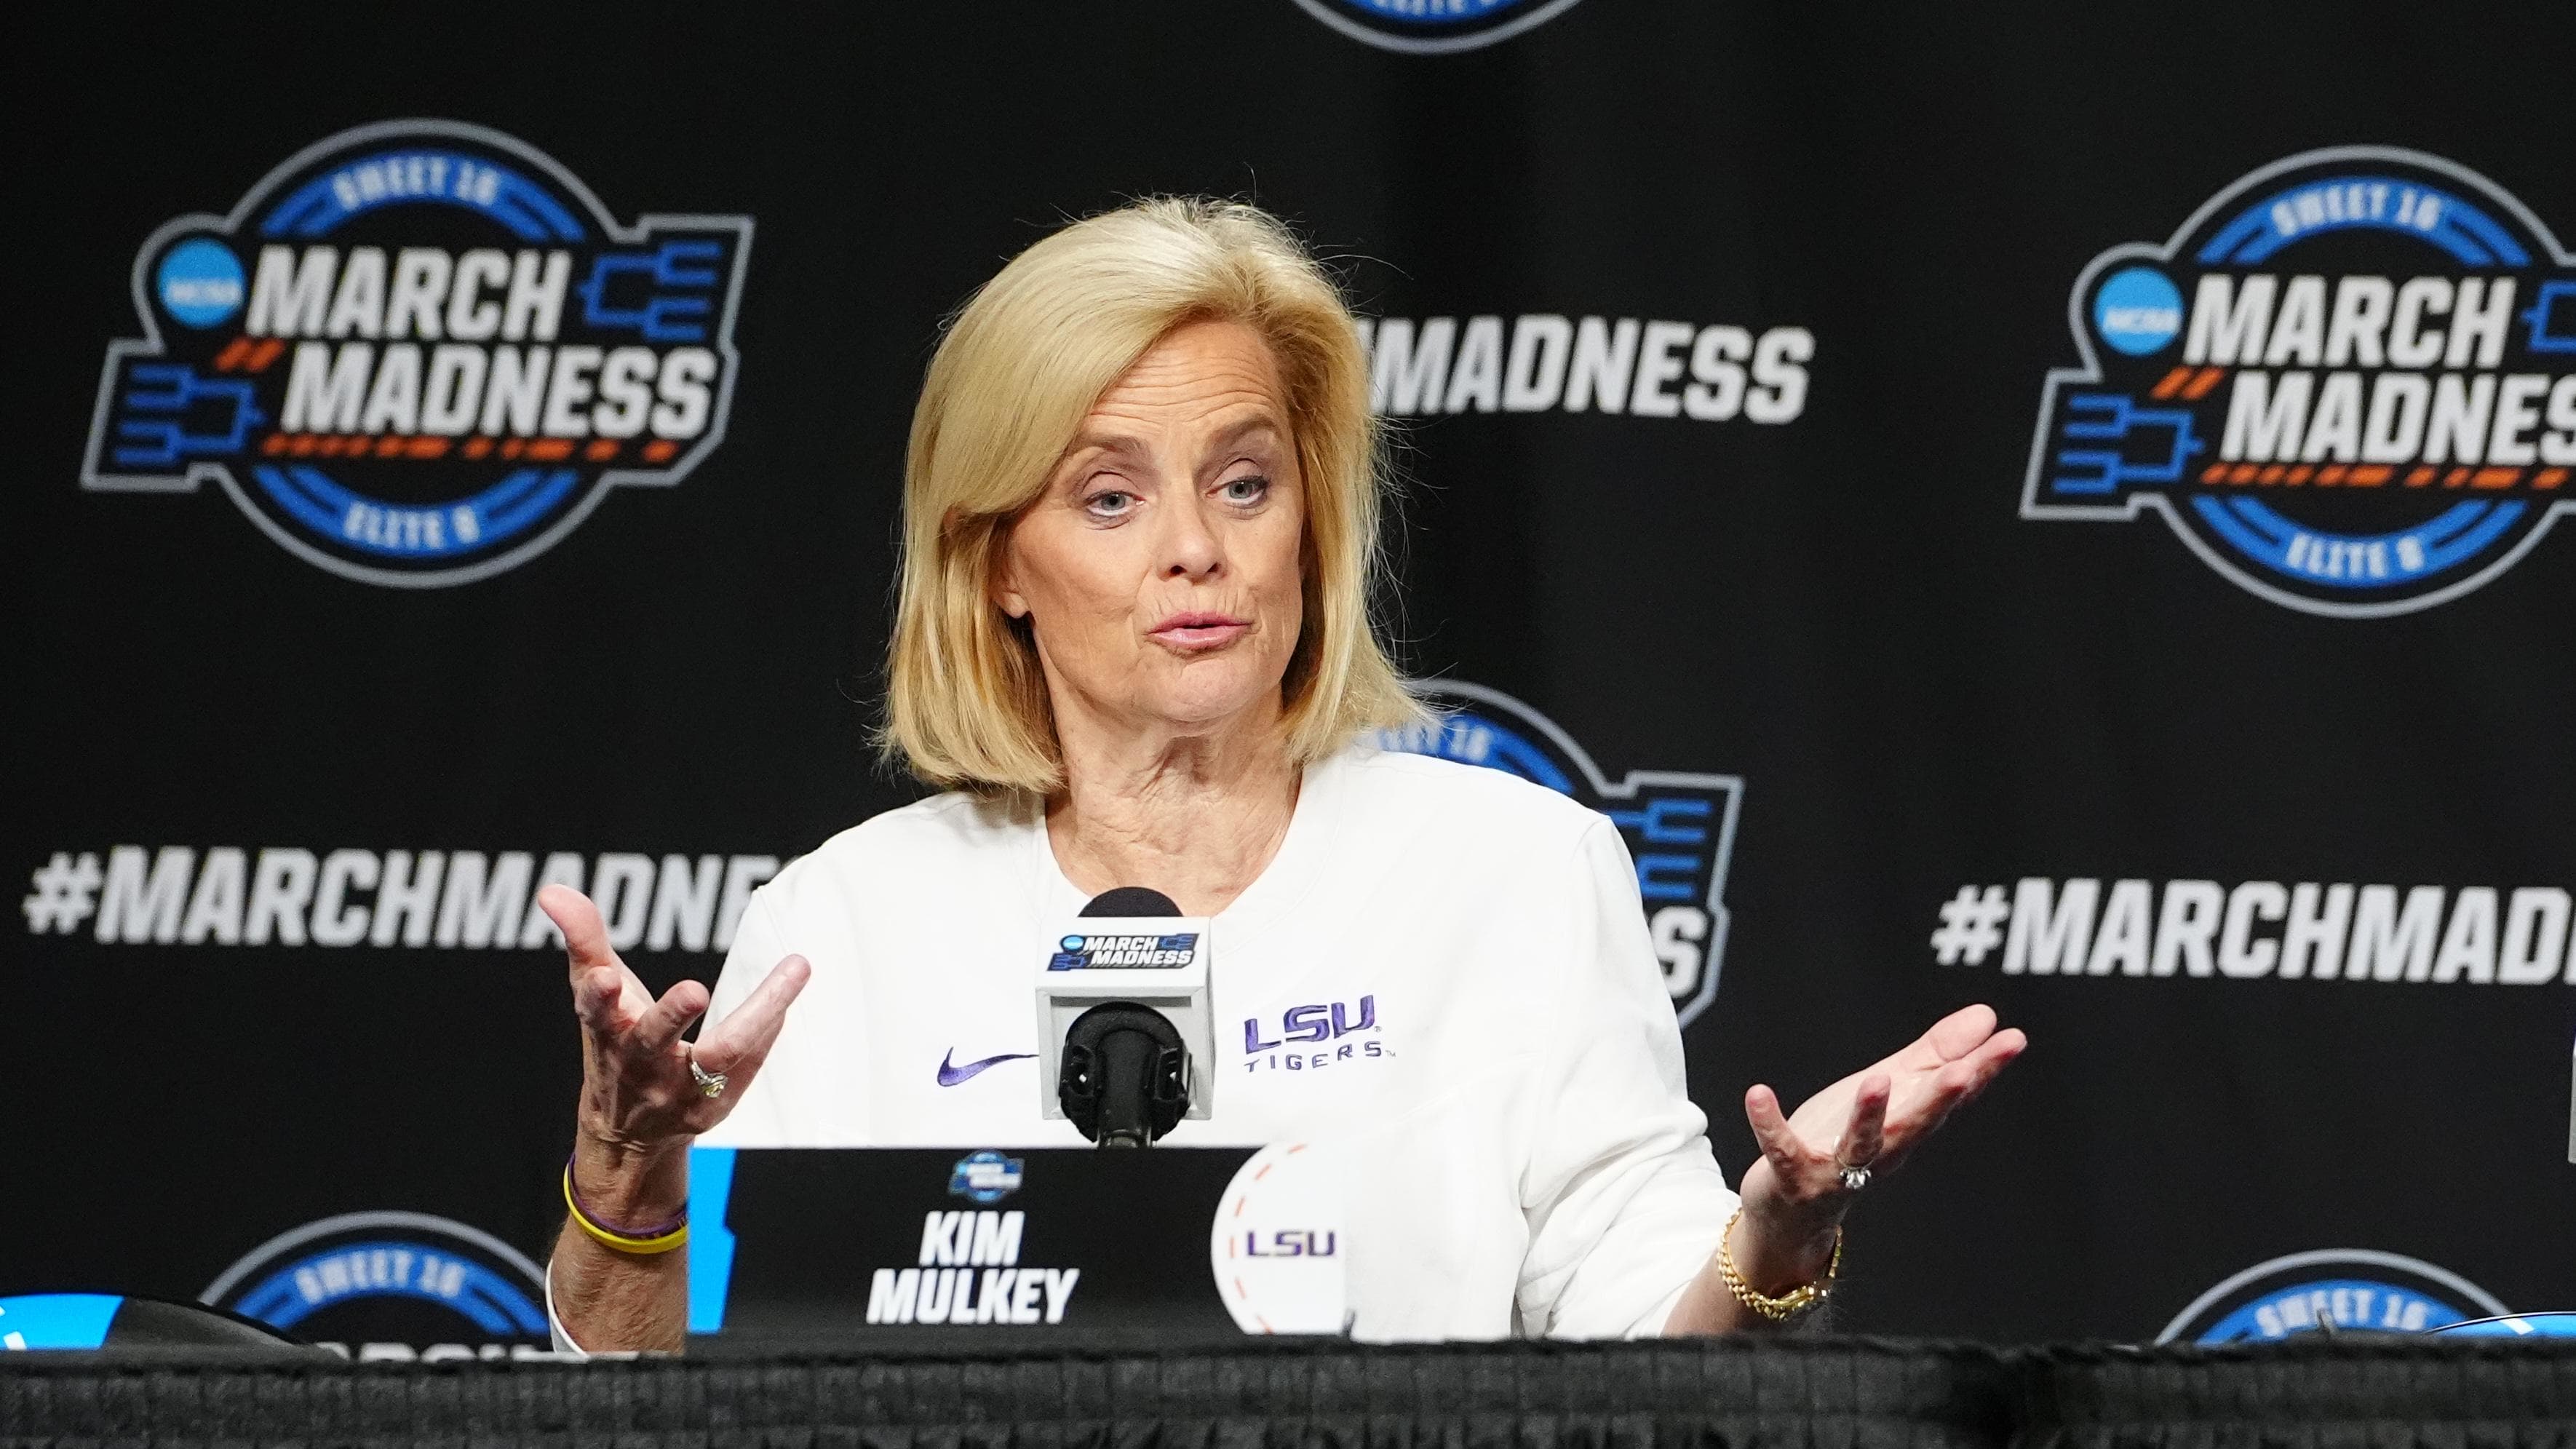 College Basketball Players Give Opinions of Kim Mulkey in Anonymous Poll